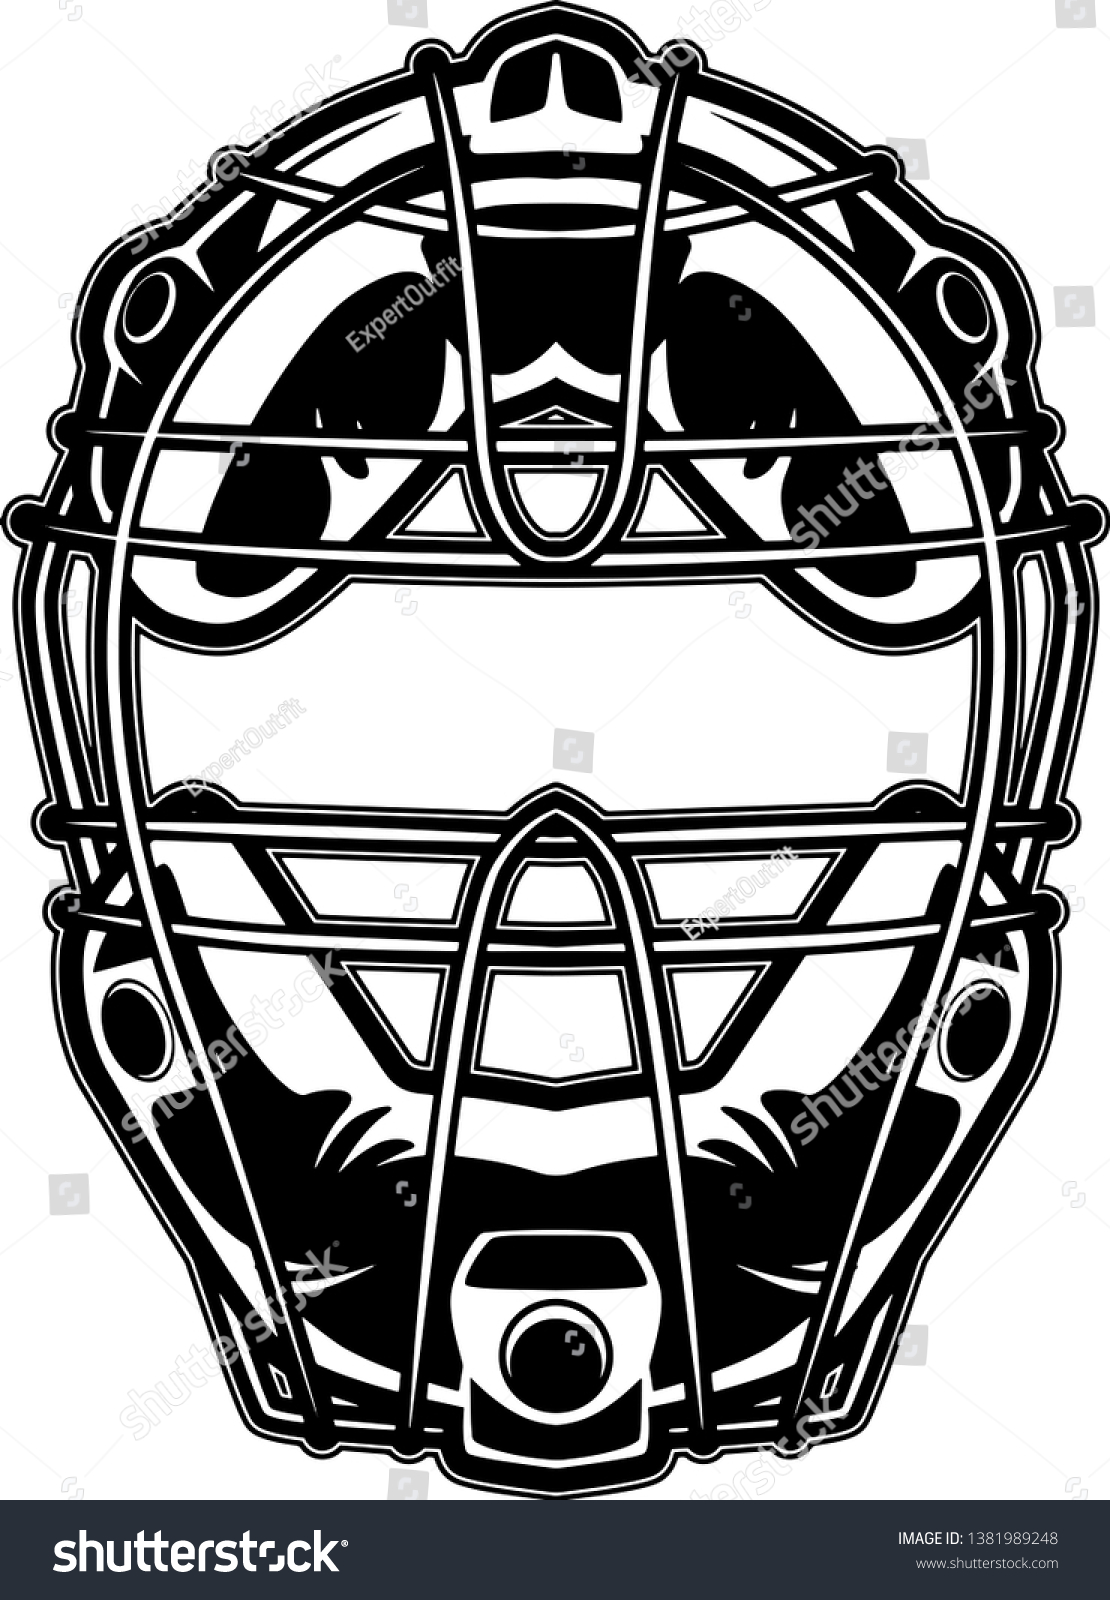 SVG of Baseball Catchers Mask With Padding And Metal Bar Protection svg